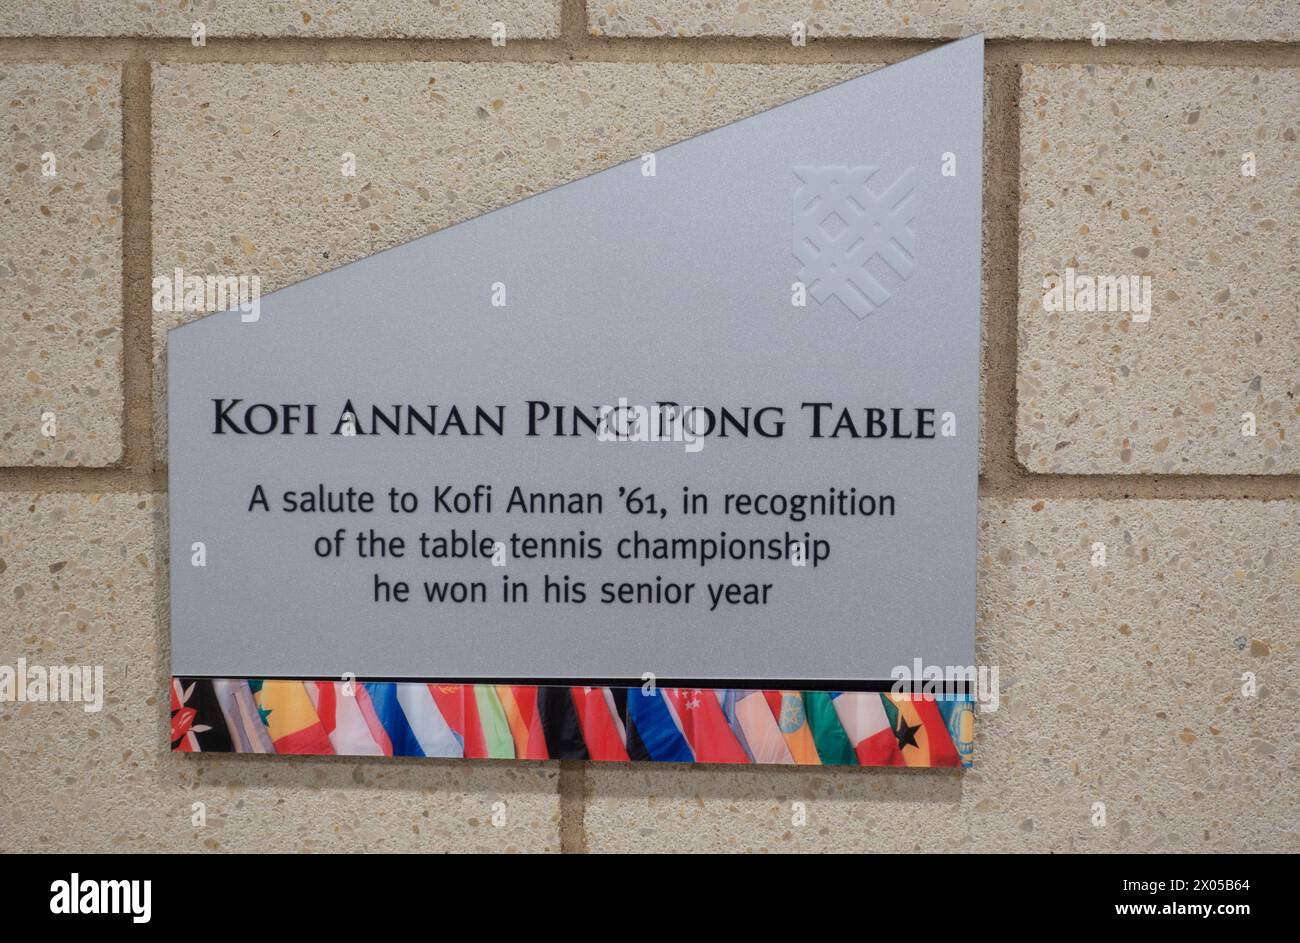 Ping pong table dedicated to Kofi Annan at Macalester College, was Secretary General of the United Nations. St Paul Minnesota MN USA Stock Photo